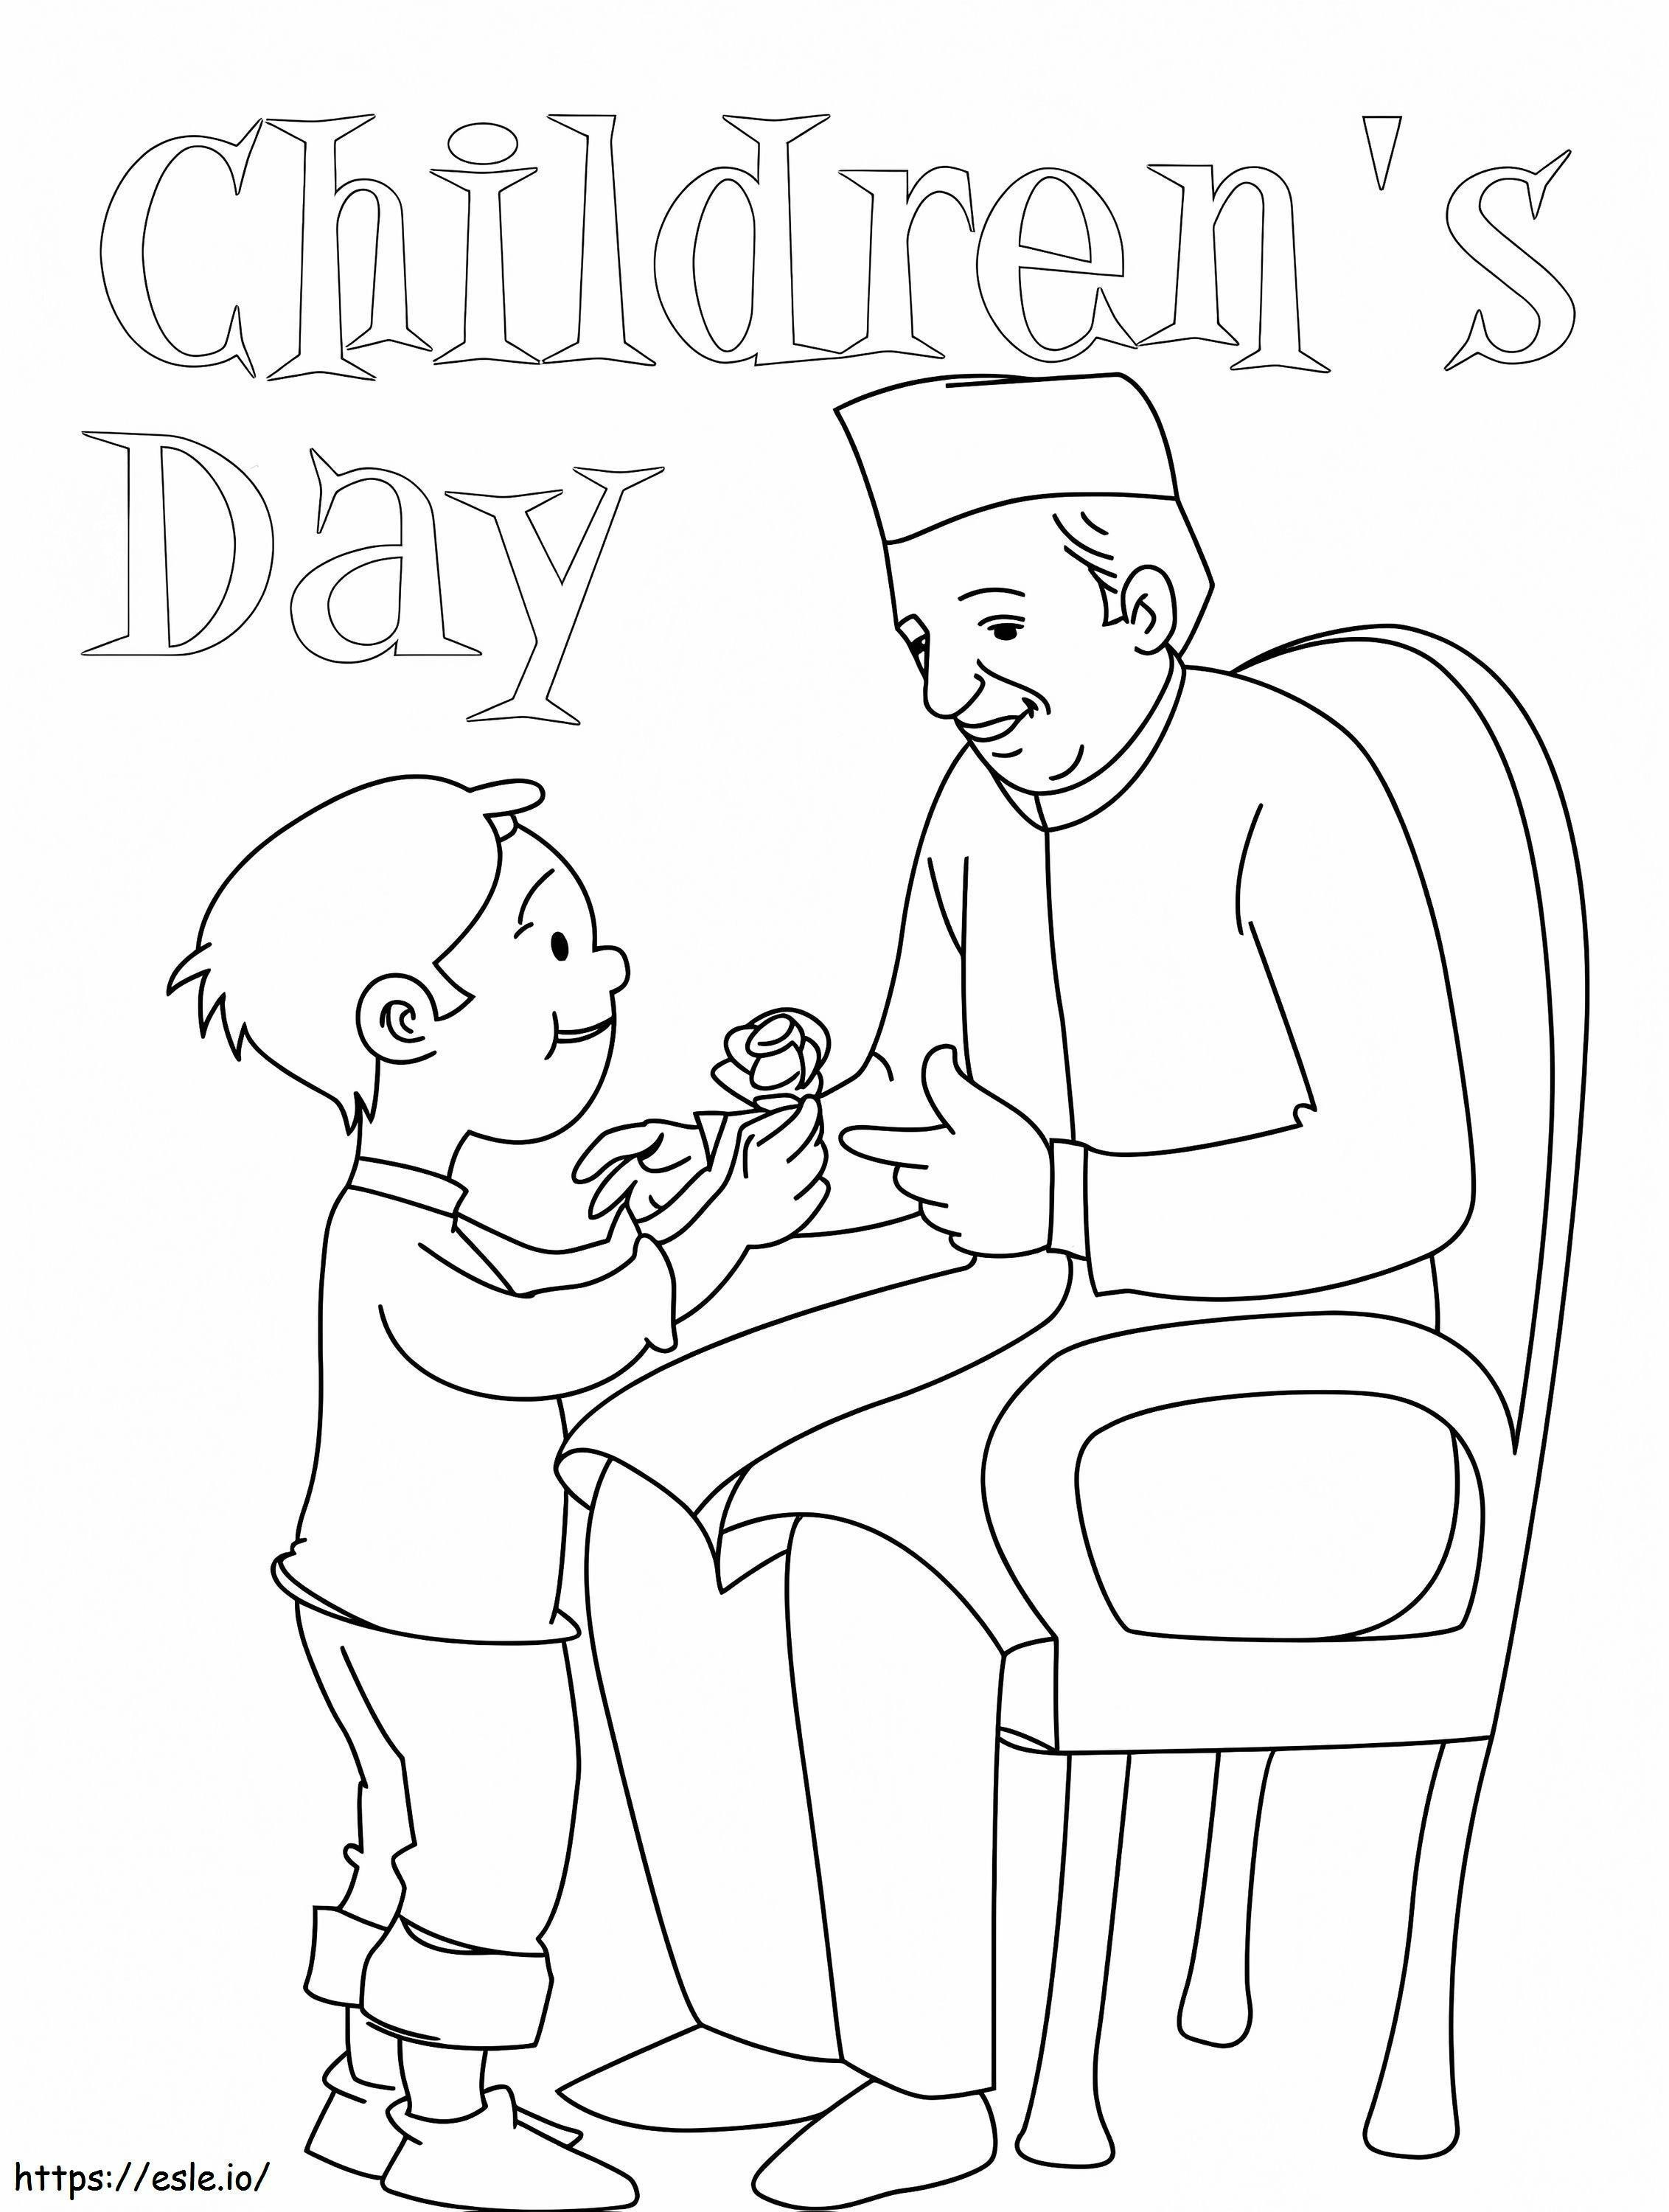 Childrens Day 7 coloring page